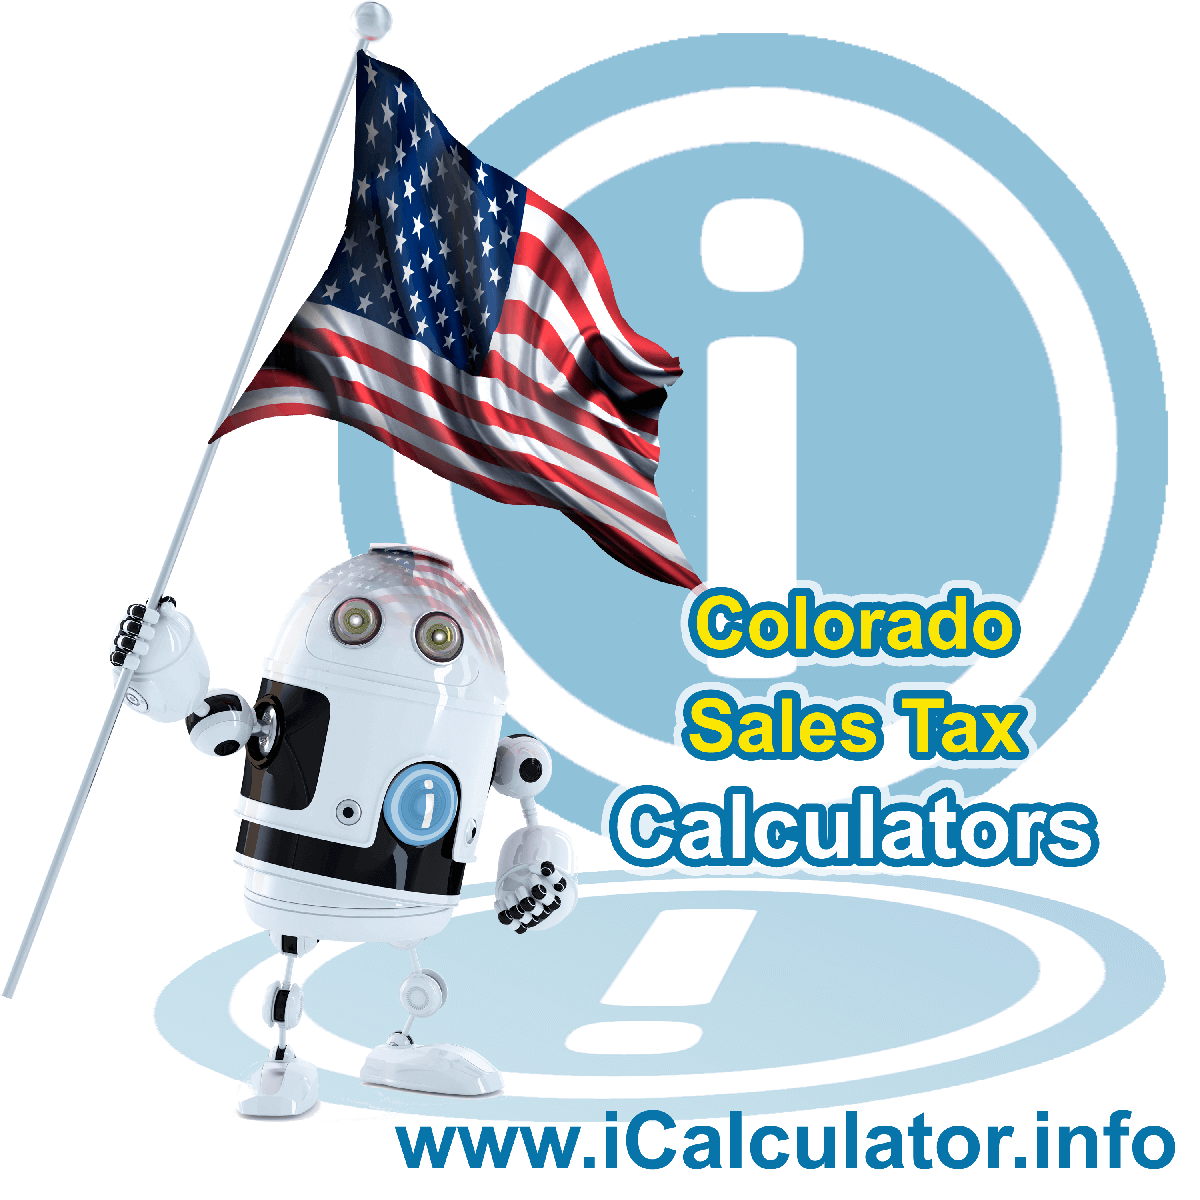 Jefferson County Remainder Sales Rates: This image illustrates a calculator robot calculating Jefferson County Remainder sales tax manually using the Jefferson County Remainder Sales Tax Formula. You can use this information to calculate Jefferson County Remainder Sales Tax manually or use the Jefferson County Remainder Sales Tax Calculator to calculate sales tax online.